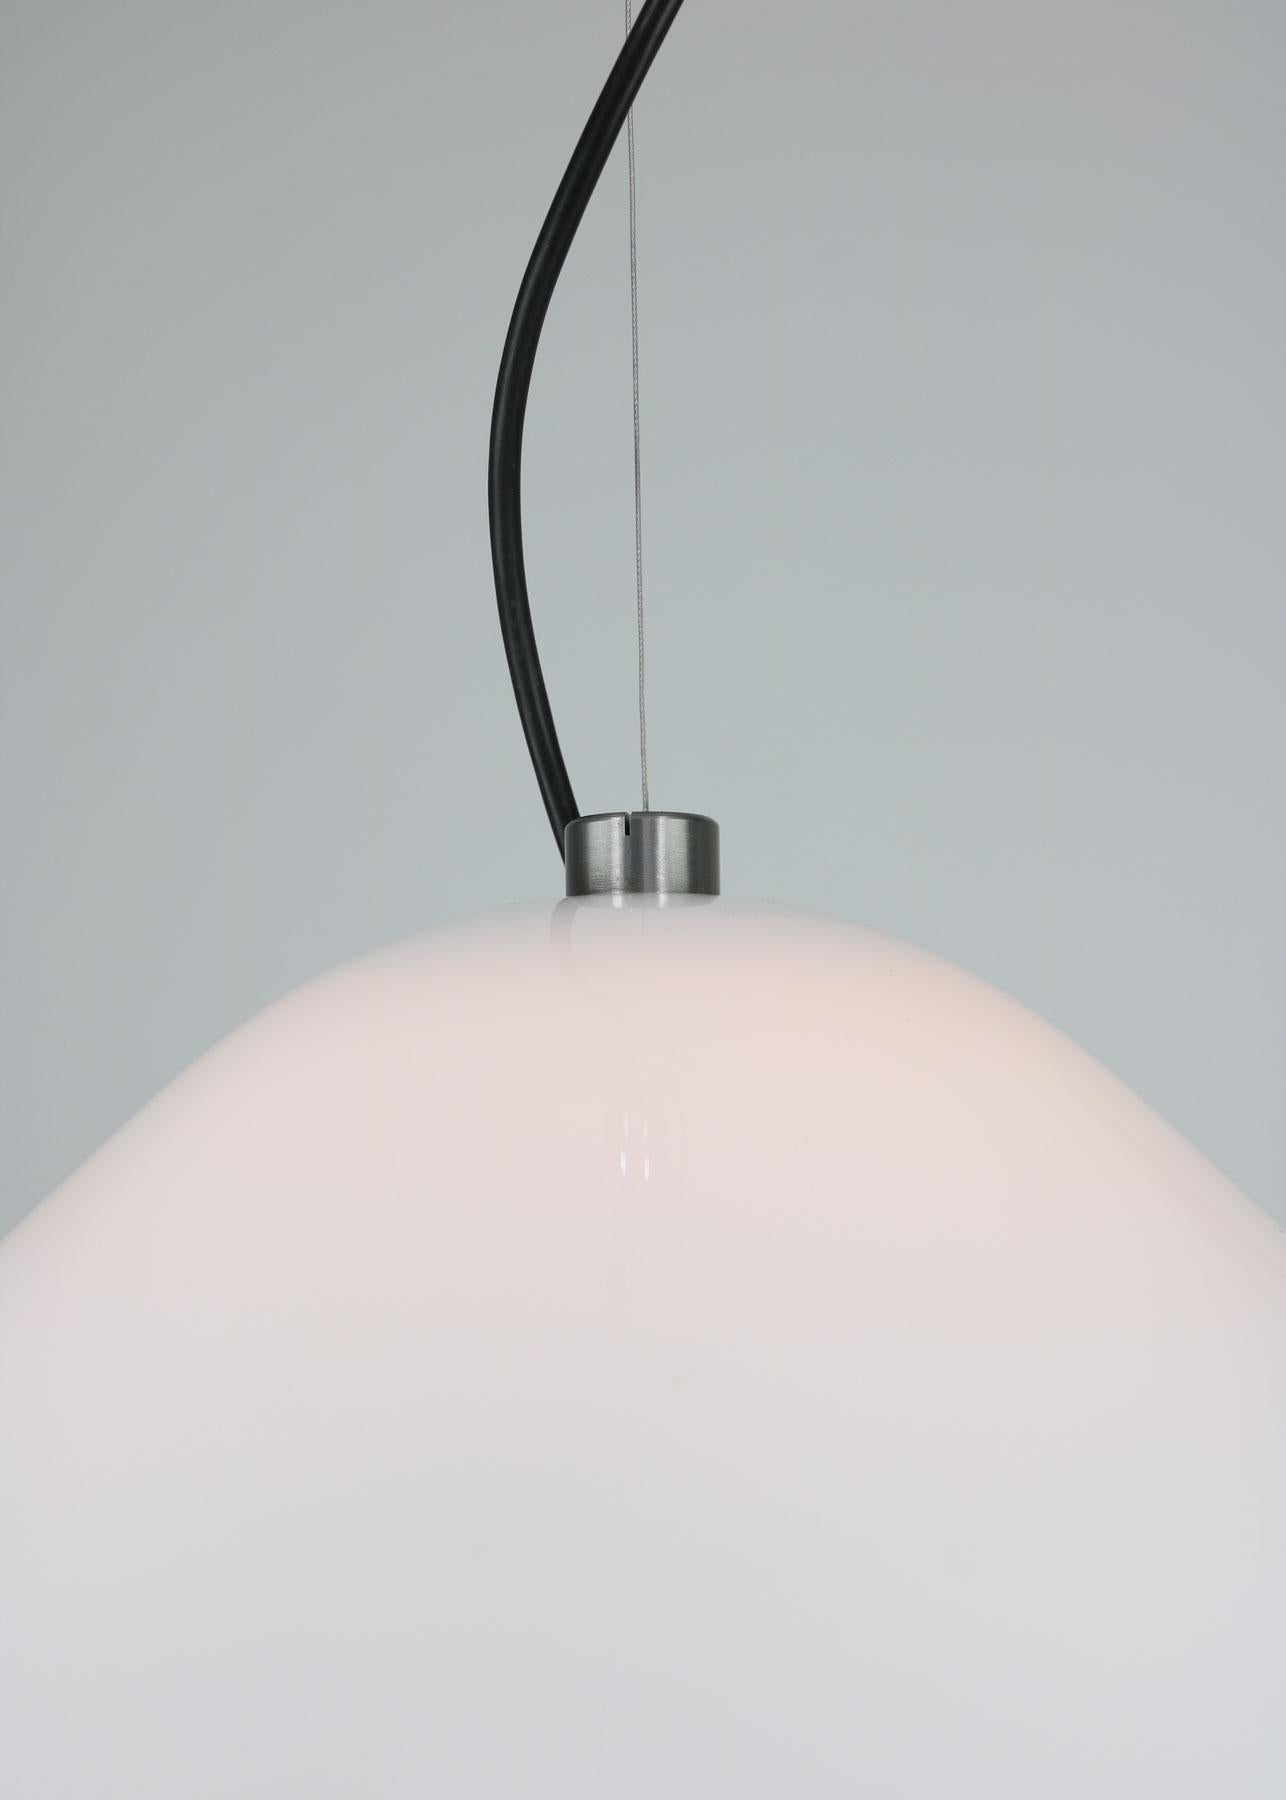 Vintage Space Age Pendant Lamp from Guzzini & Meblo, 1970s For Sale 1